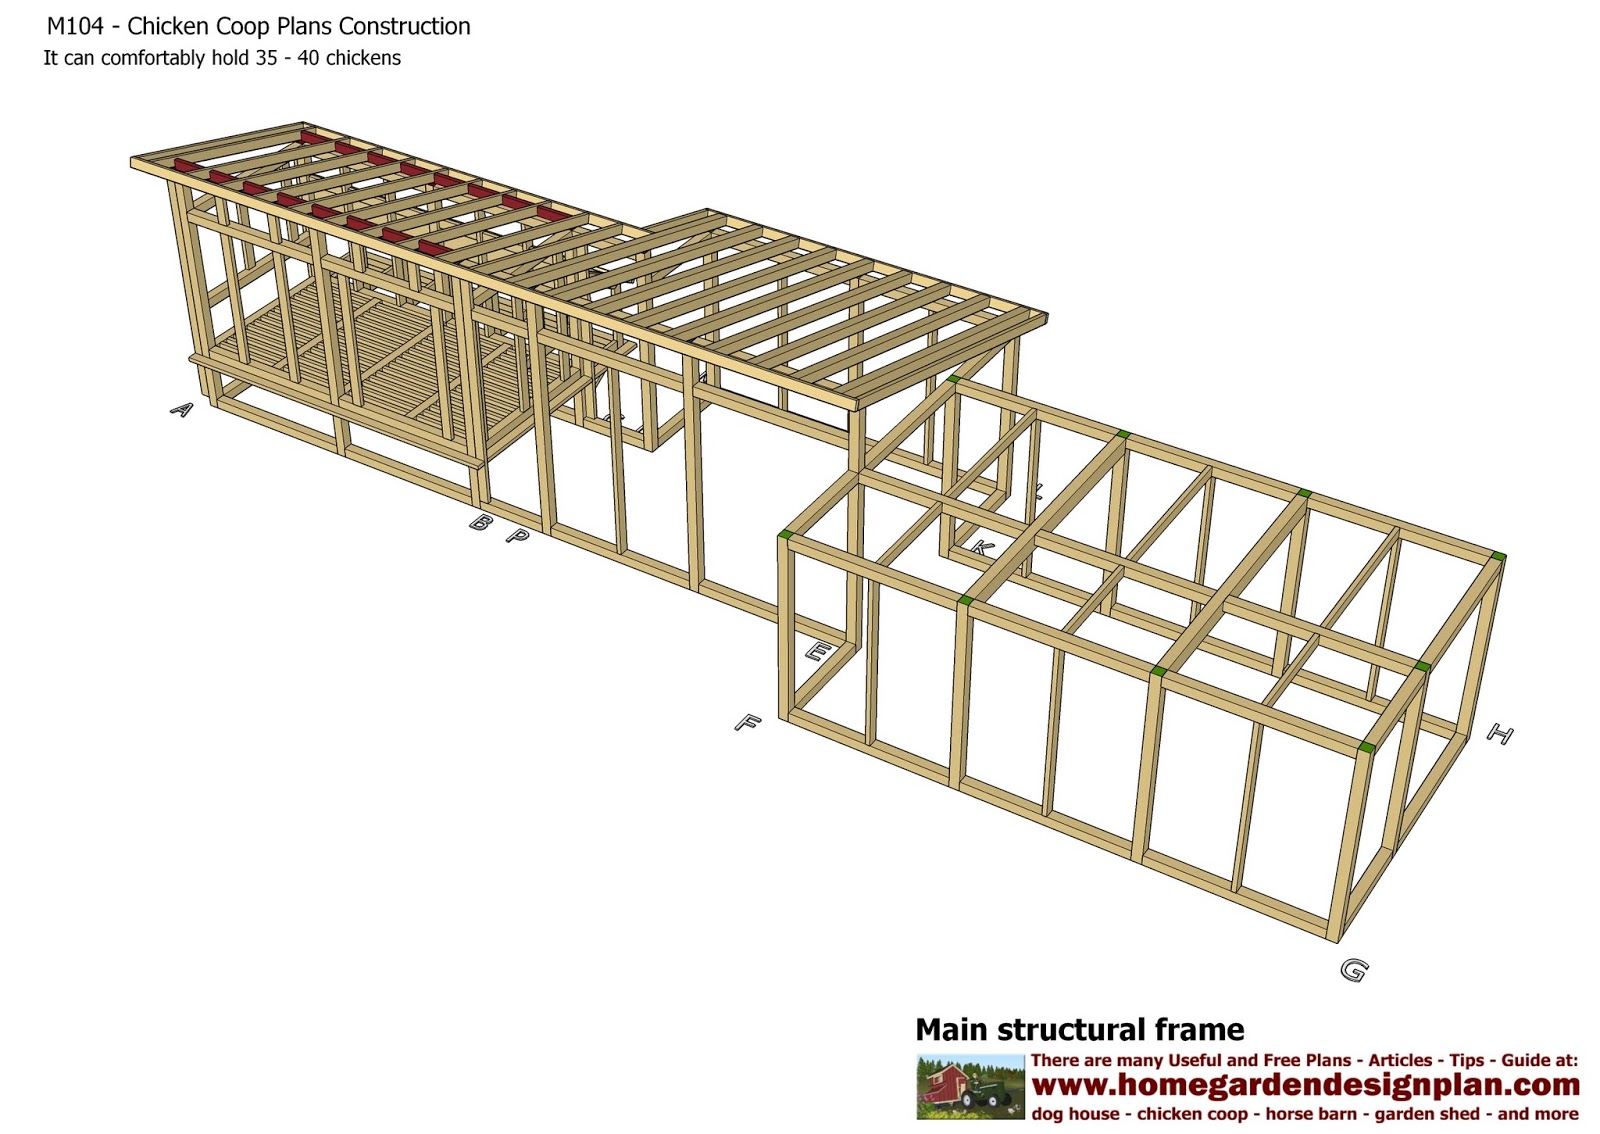 chicken co op plans free plans chicken coop plans construction ...